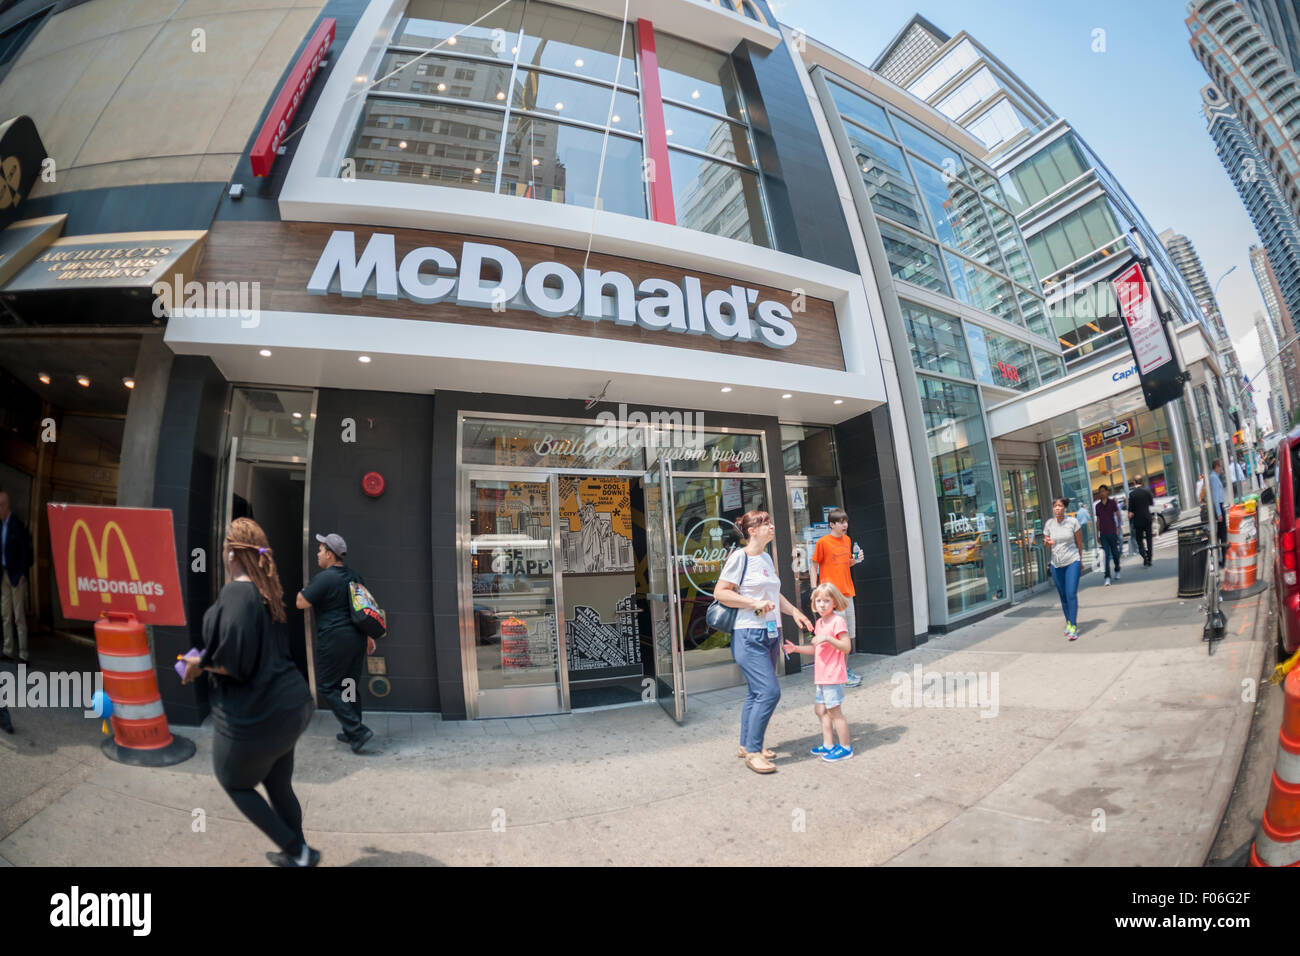 A McDonald's franchise where the "Create Your Taste" kiosks are being used, in New York on Tuesday, August 4, 2015. The interactive iPad-like digital displays allow customers to customize their order with toppings, new sauces, etc. and have them delivered to their table in a few minutes. McDonald's, which has seen same-store sales drop over three years, is using the kiosks to compete with fast casual restaurants such as Chipotle, Fatburger and a host of others. (© Richard B. Levine) Stock Photo